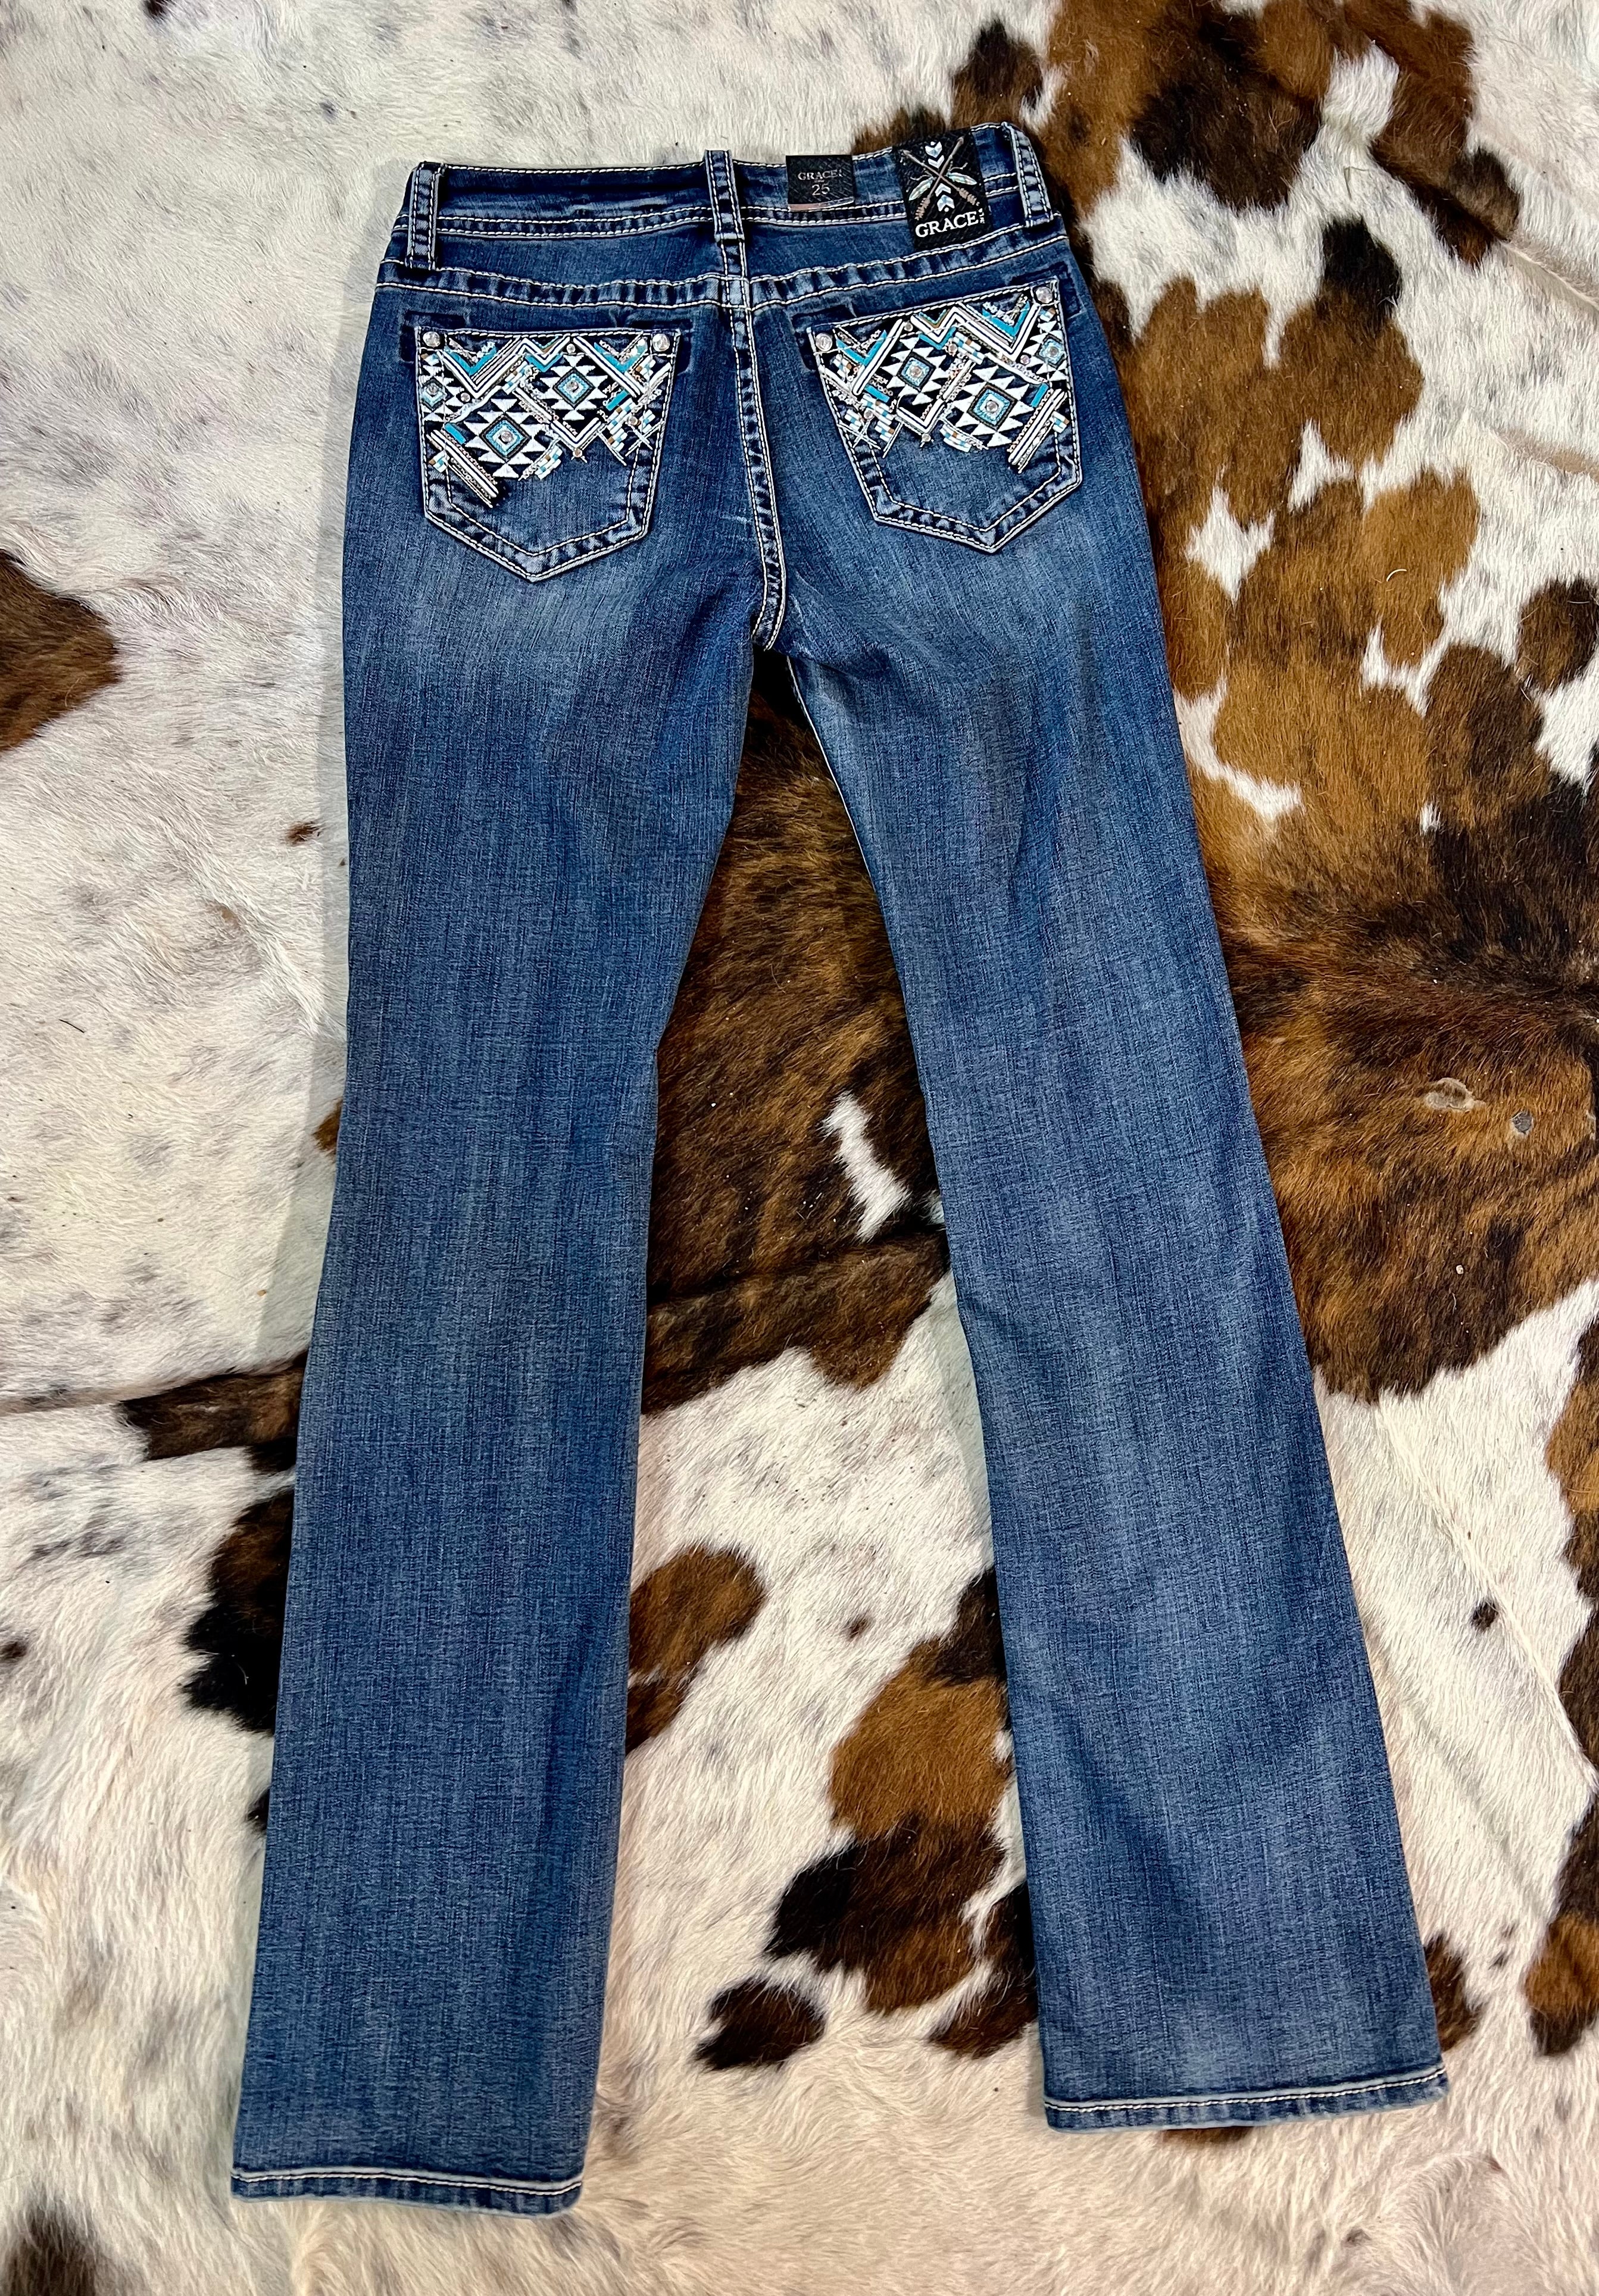 Grace in LA Women's Western Turquoise Studded Embroidered Bootcut Jeans